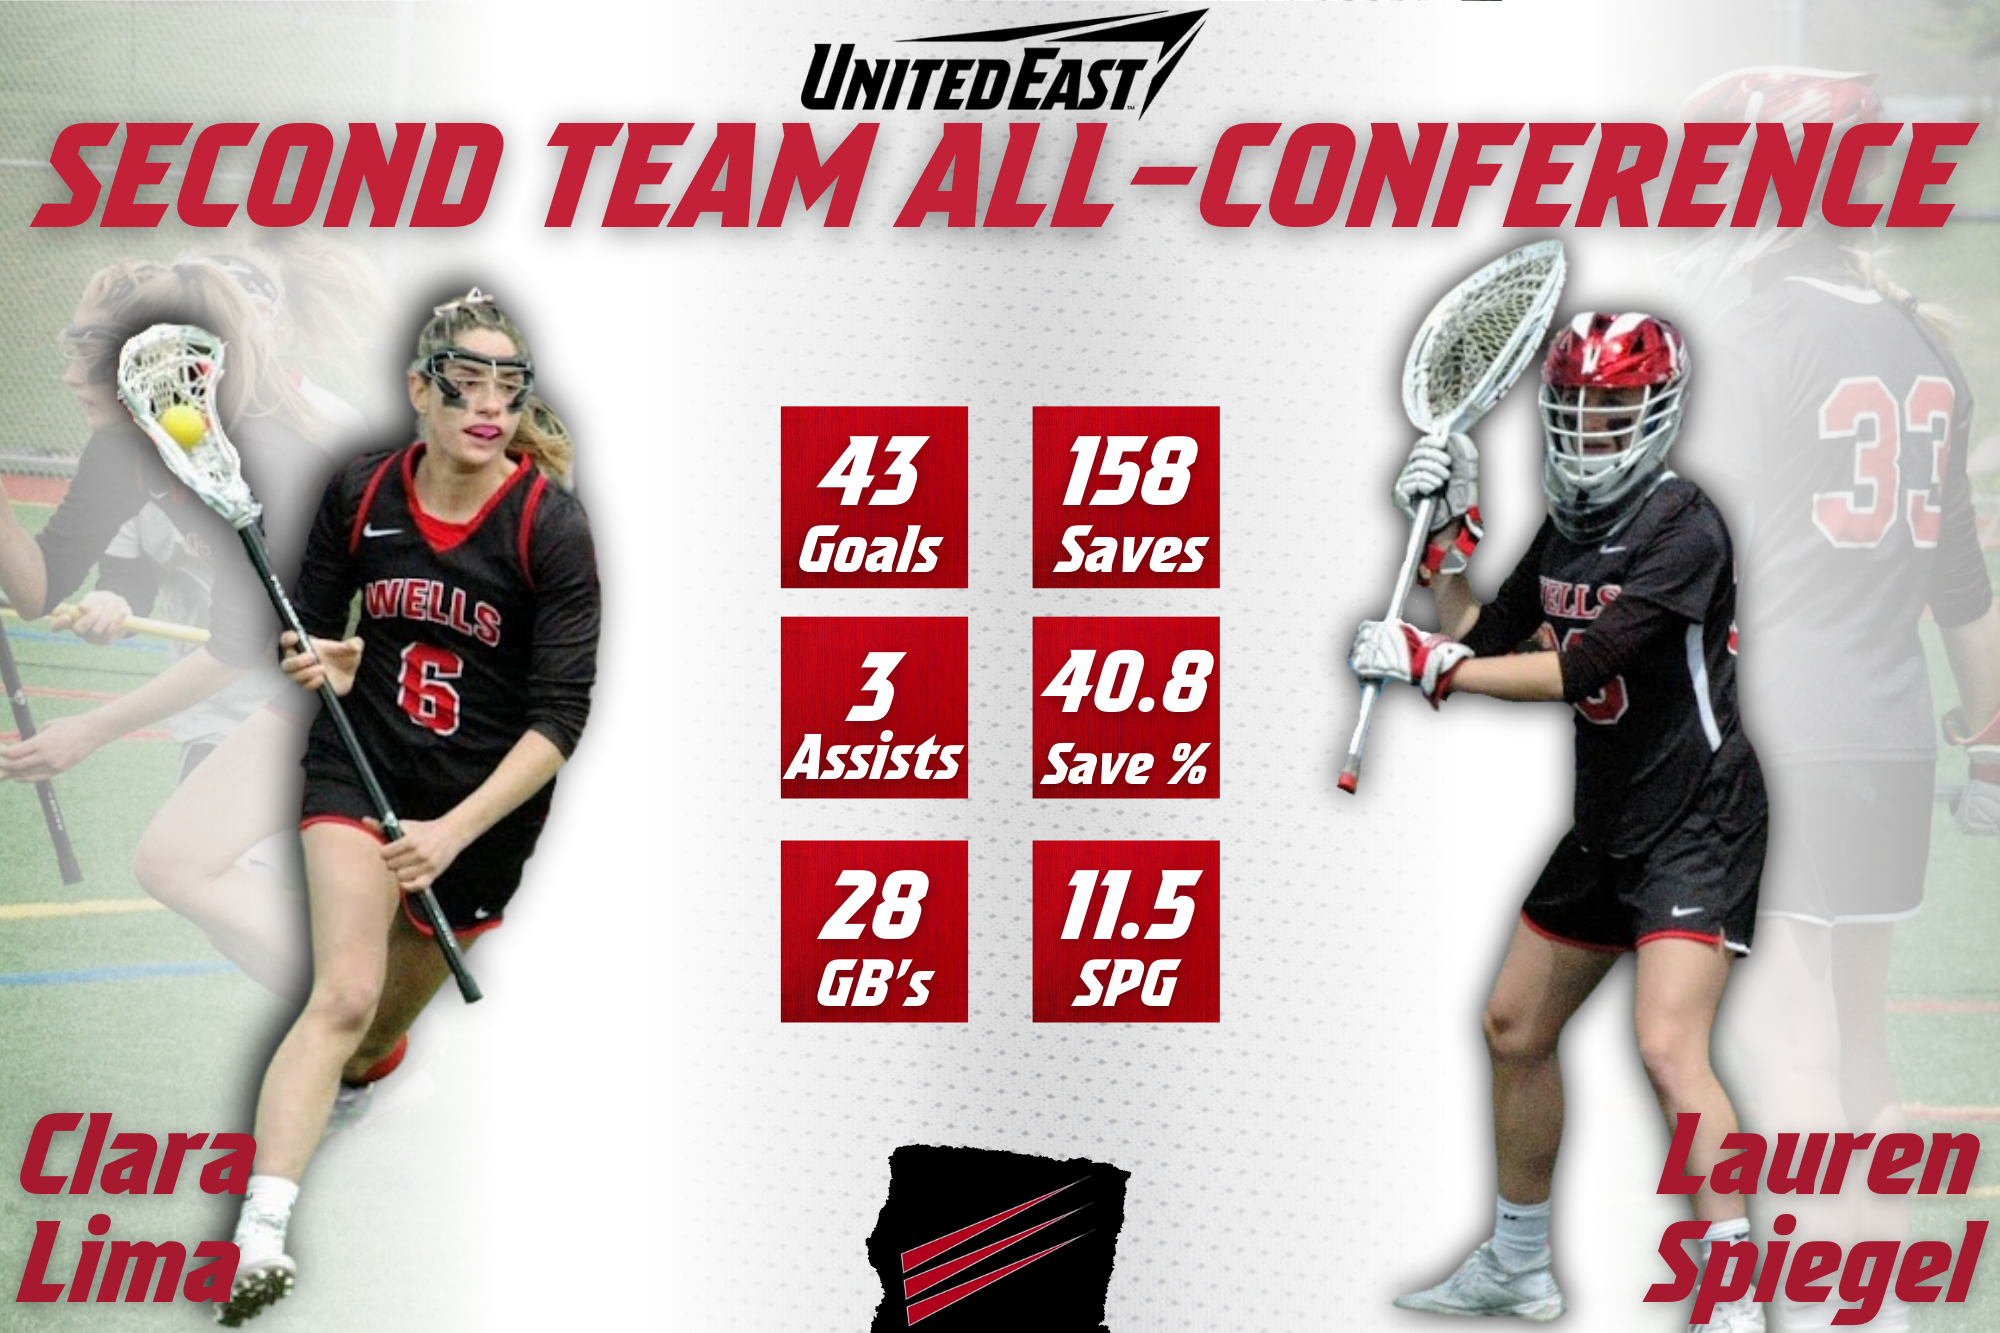 Lima and Spiegel named to All-Conference Team!